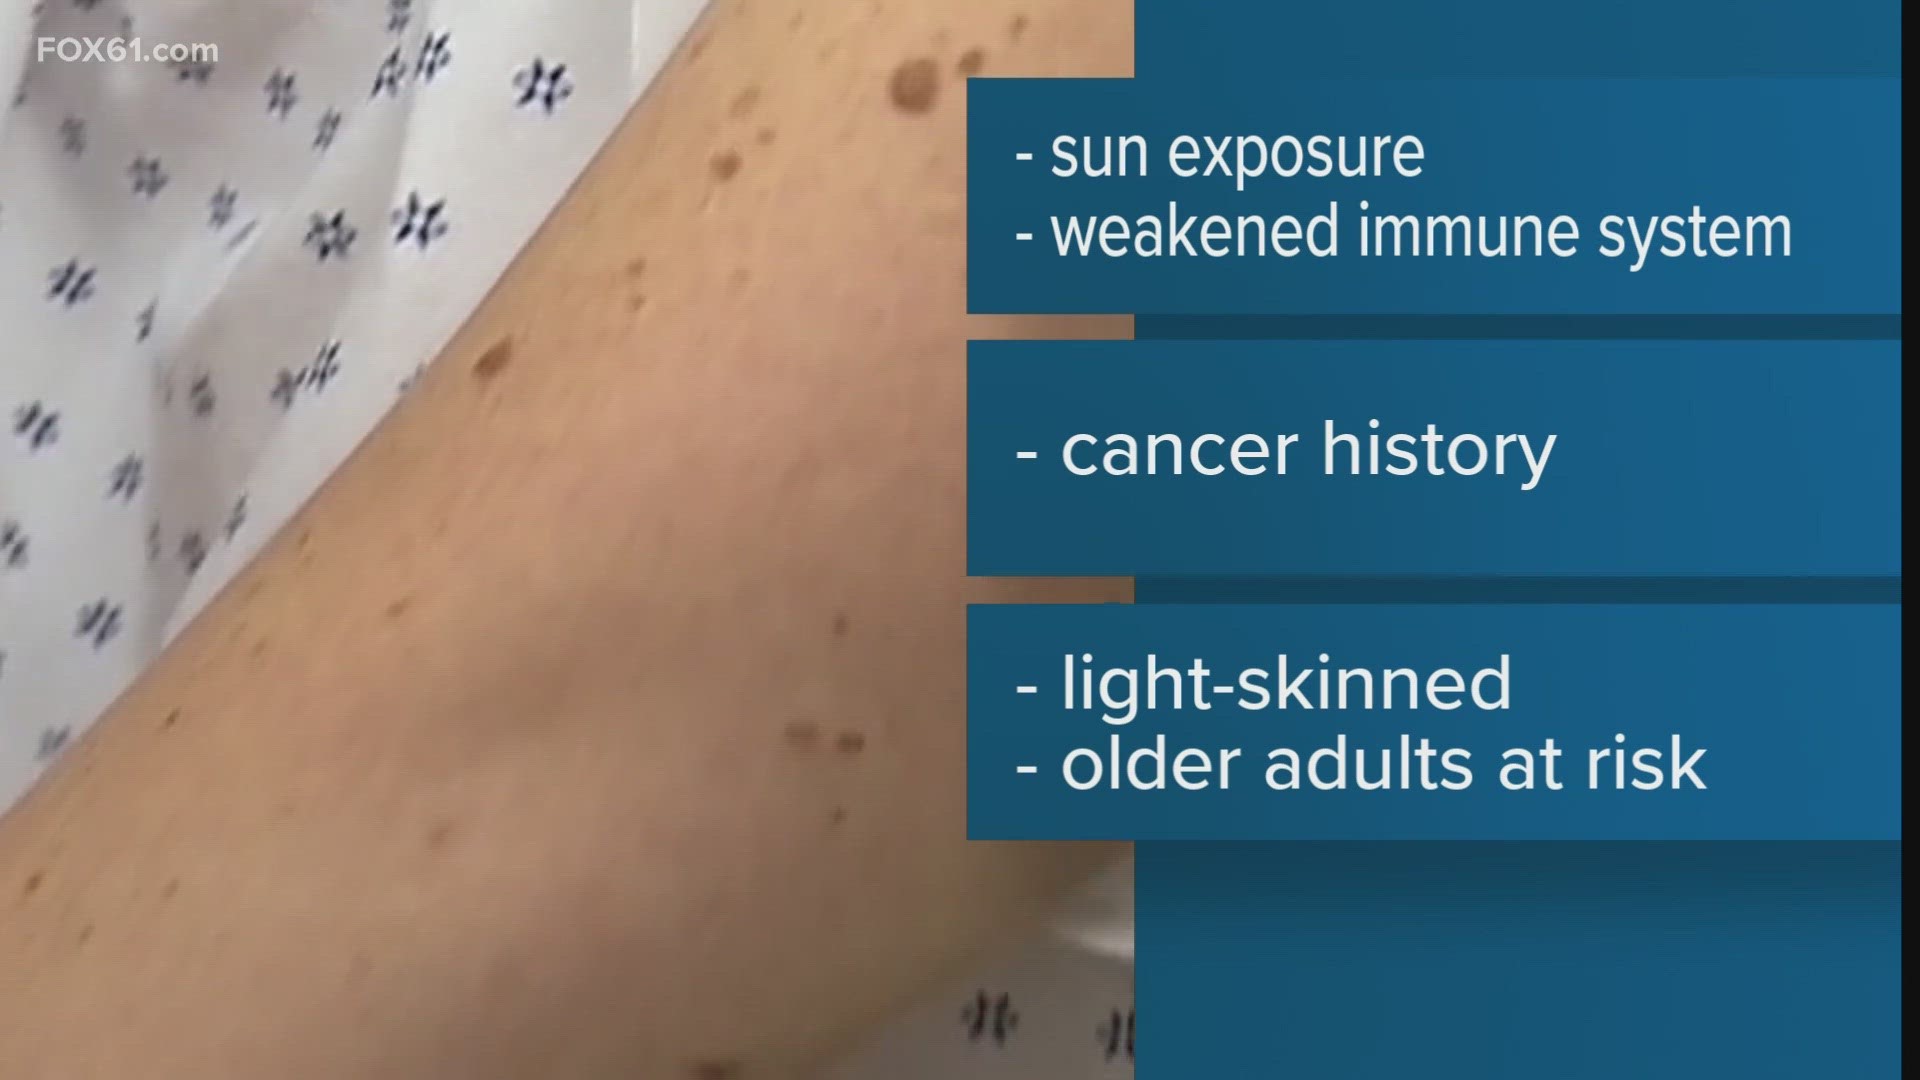 Dr. Andrew Salner, Dir. of 'Helen & Harry Gray Cancer Center' at Hartford Hospital, discusses the rare skin cancer that caused Jimmy Buffett's death.